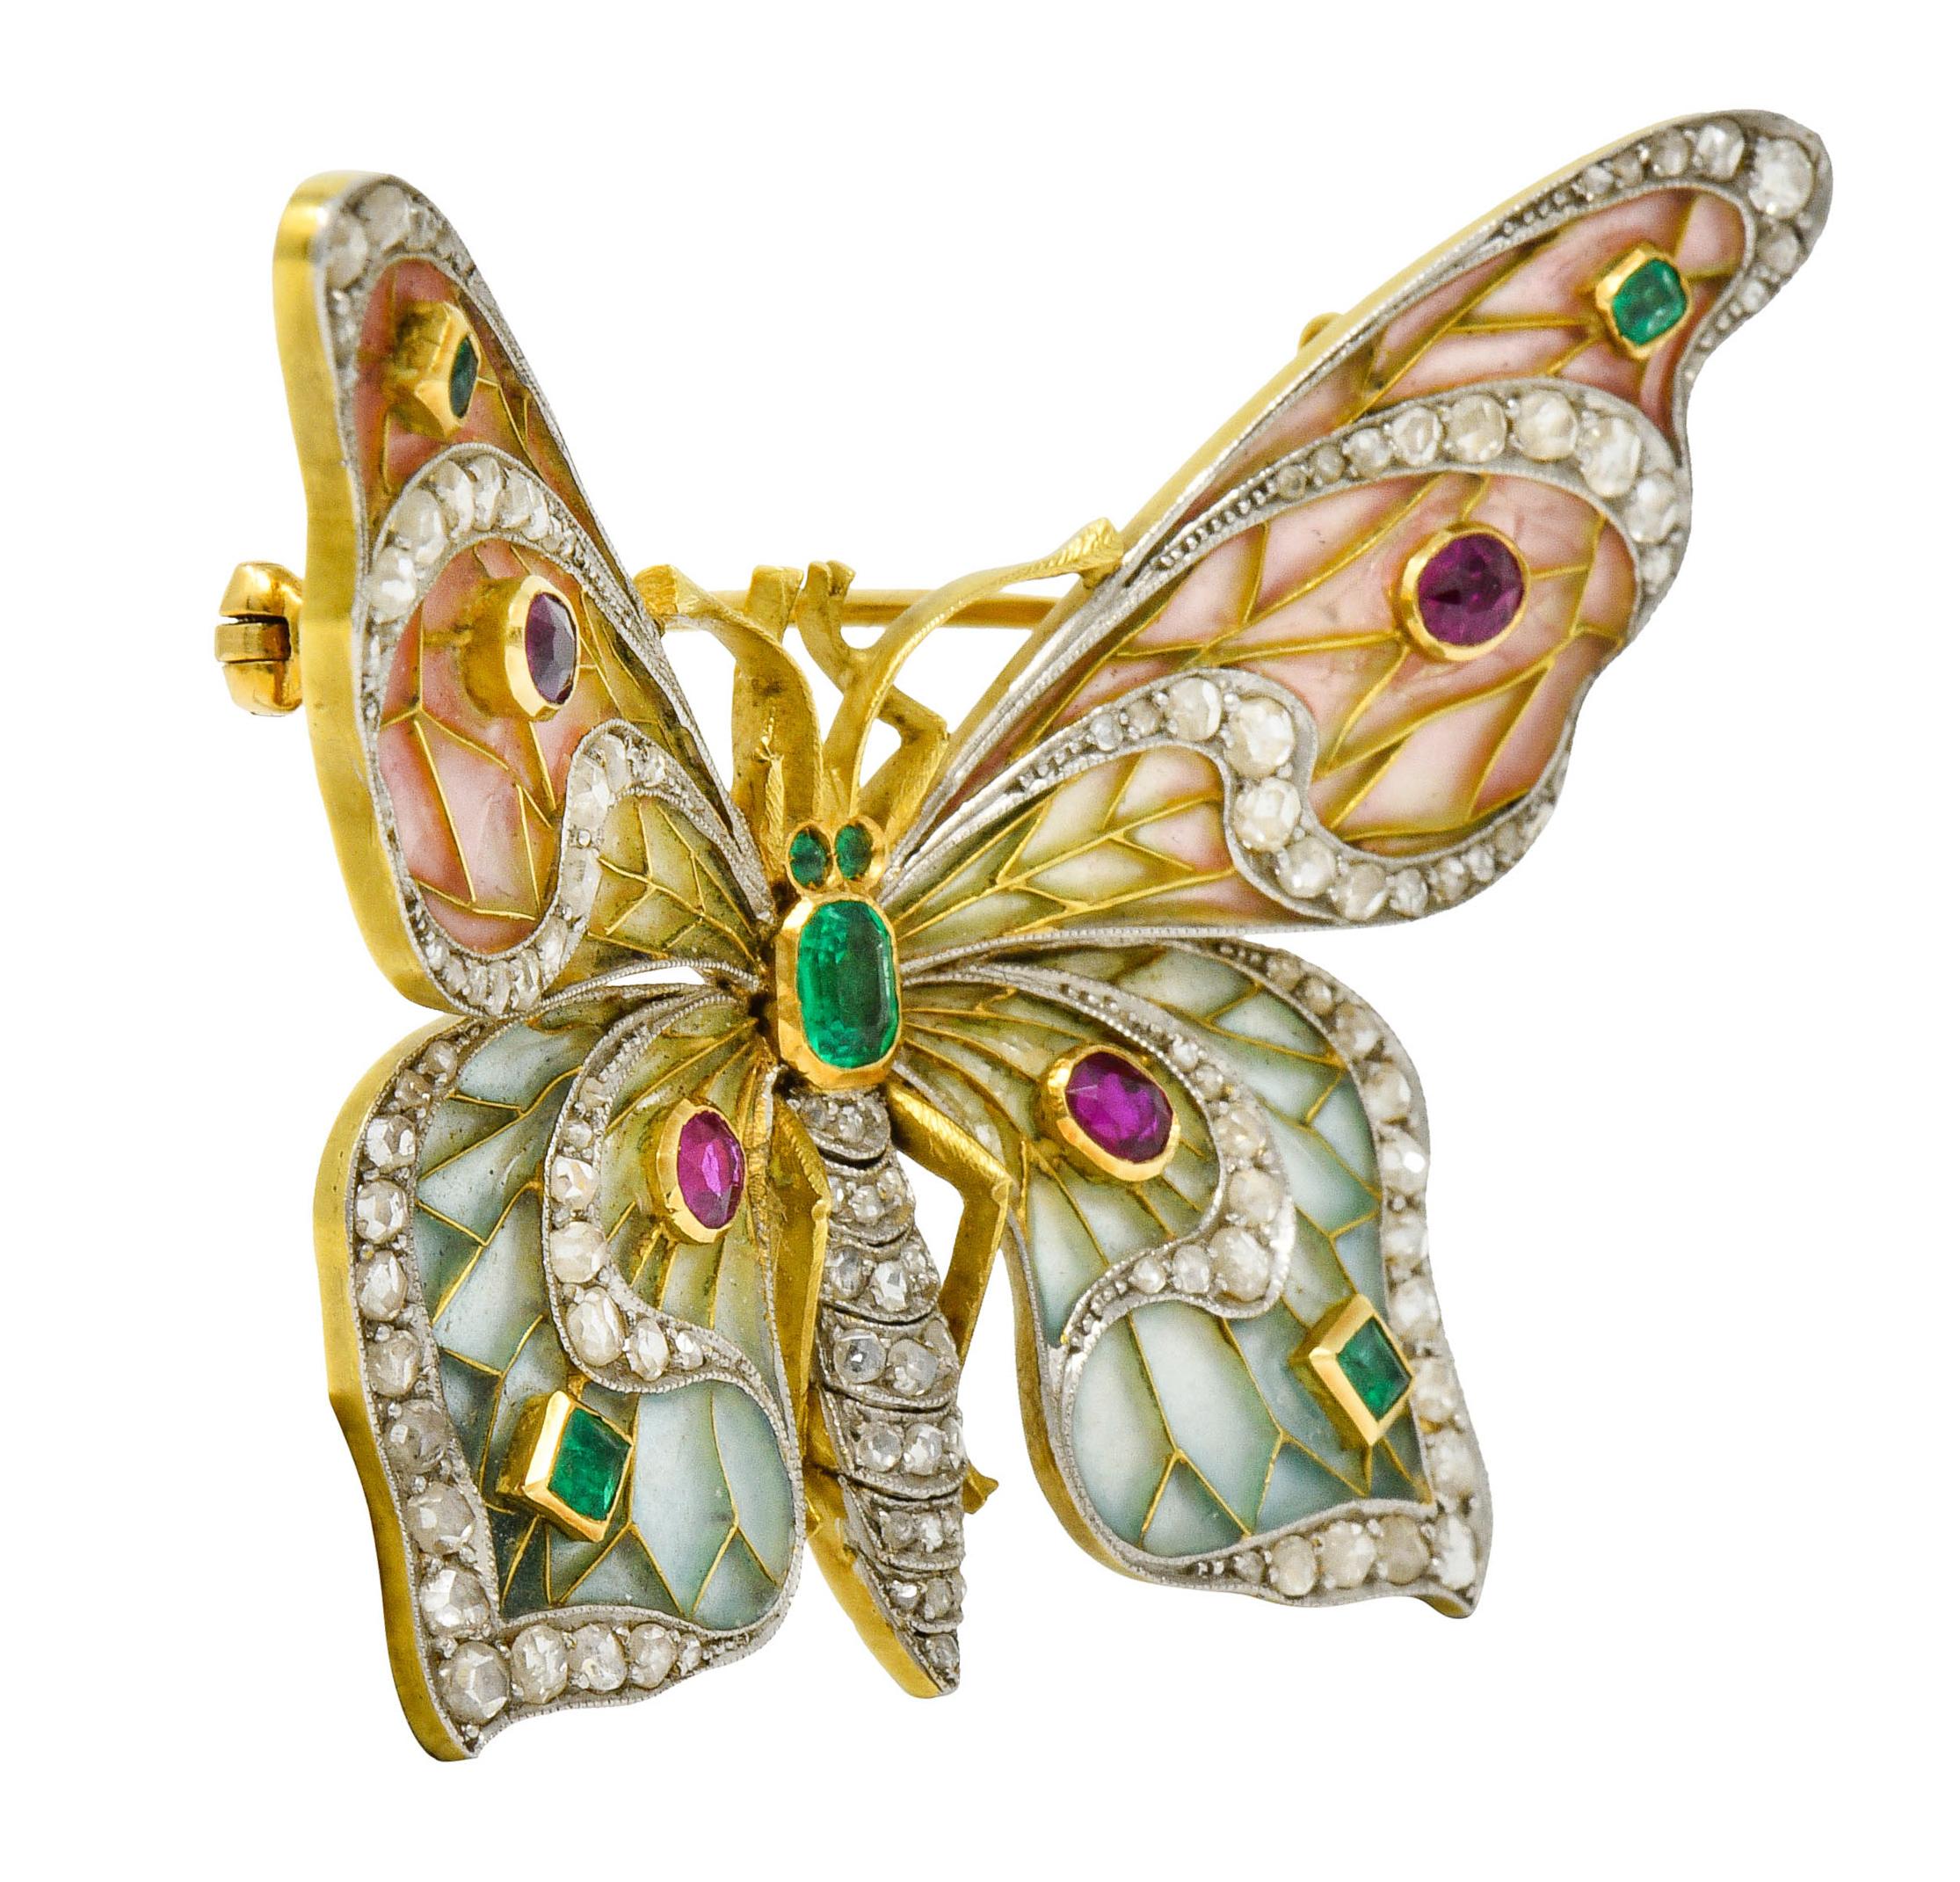 Designed as a butterfly with beautiful translucent plique-a-jour wings

Pastel ombrè pink, yellow, green, to blue color with minor loss consistent with age

Wings are embellished with polished gold veining and platinum; bead set with rose cut